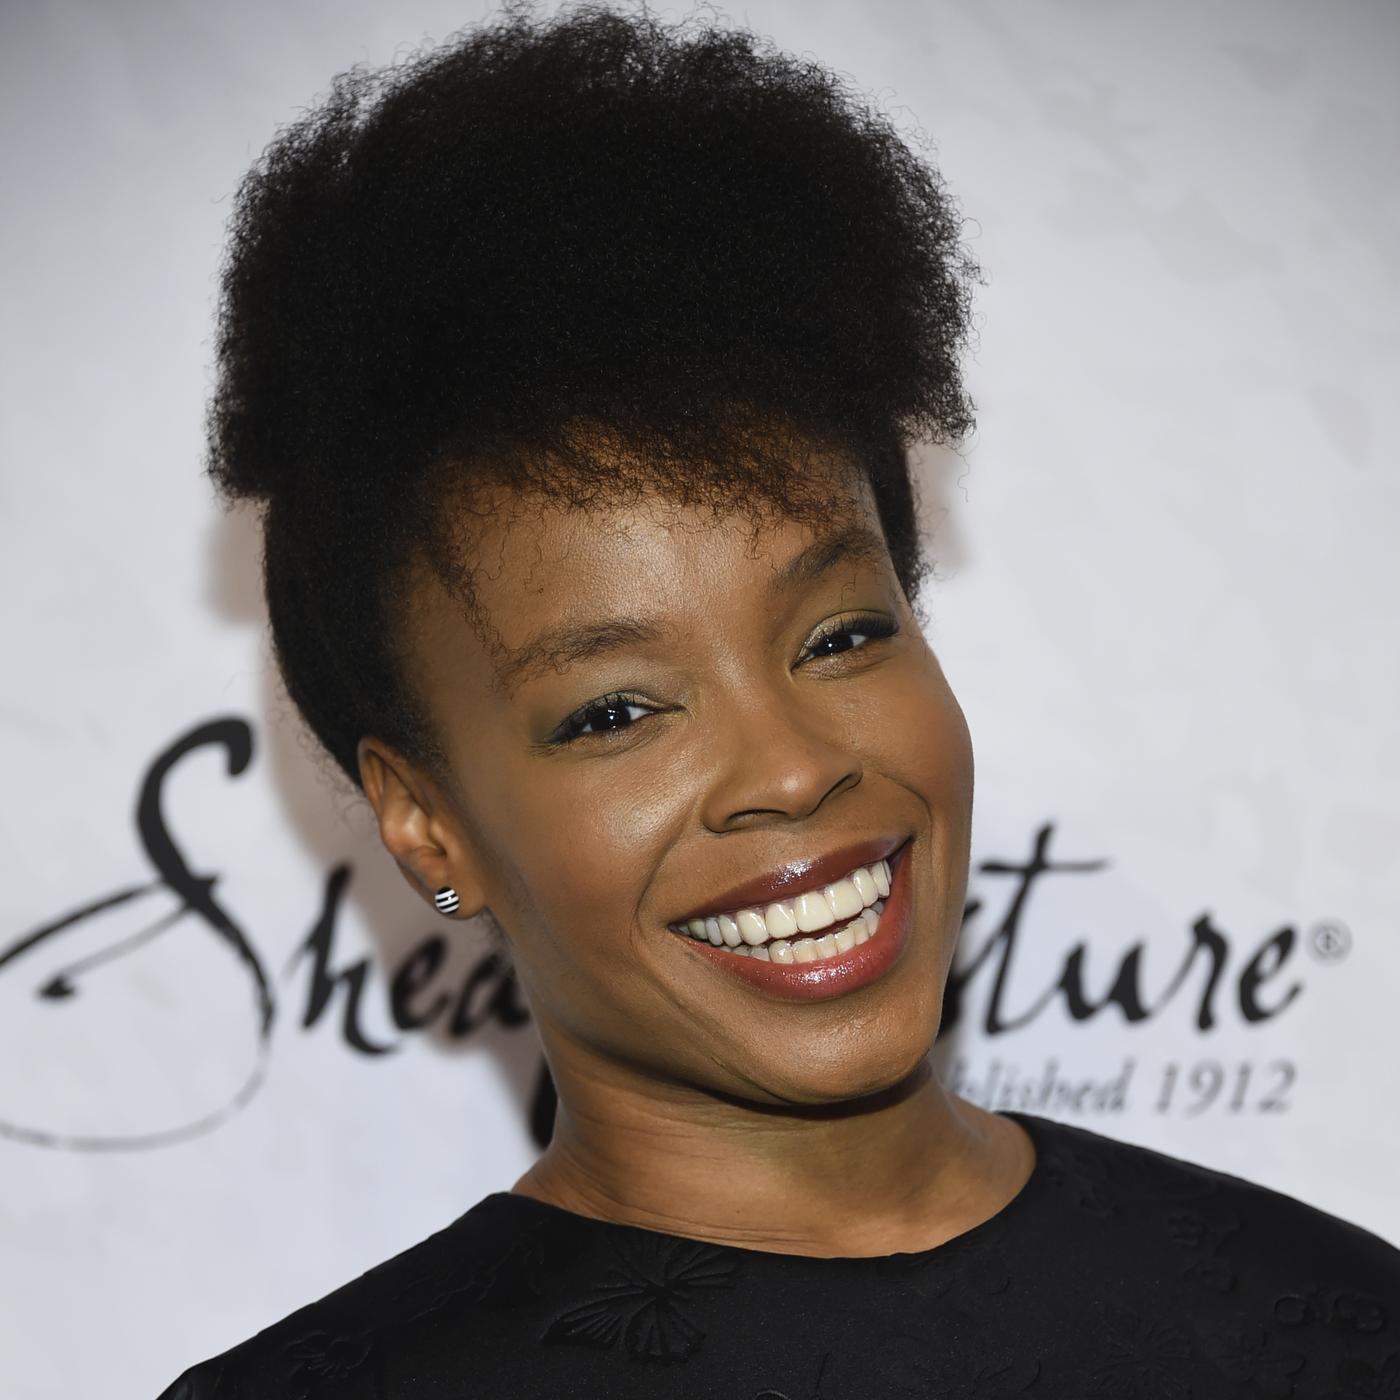 Amber Ruffin Talks ‘The Wiz’ Revival, Writing for ‘Late
Night,’ and Representation in Comedy